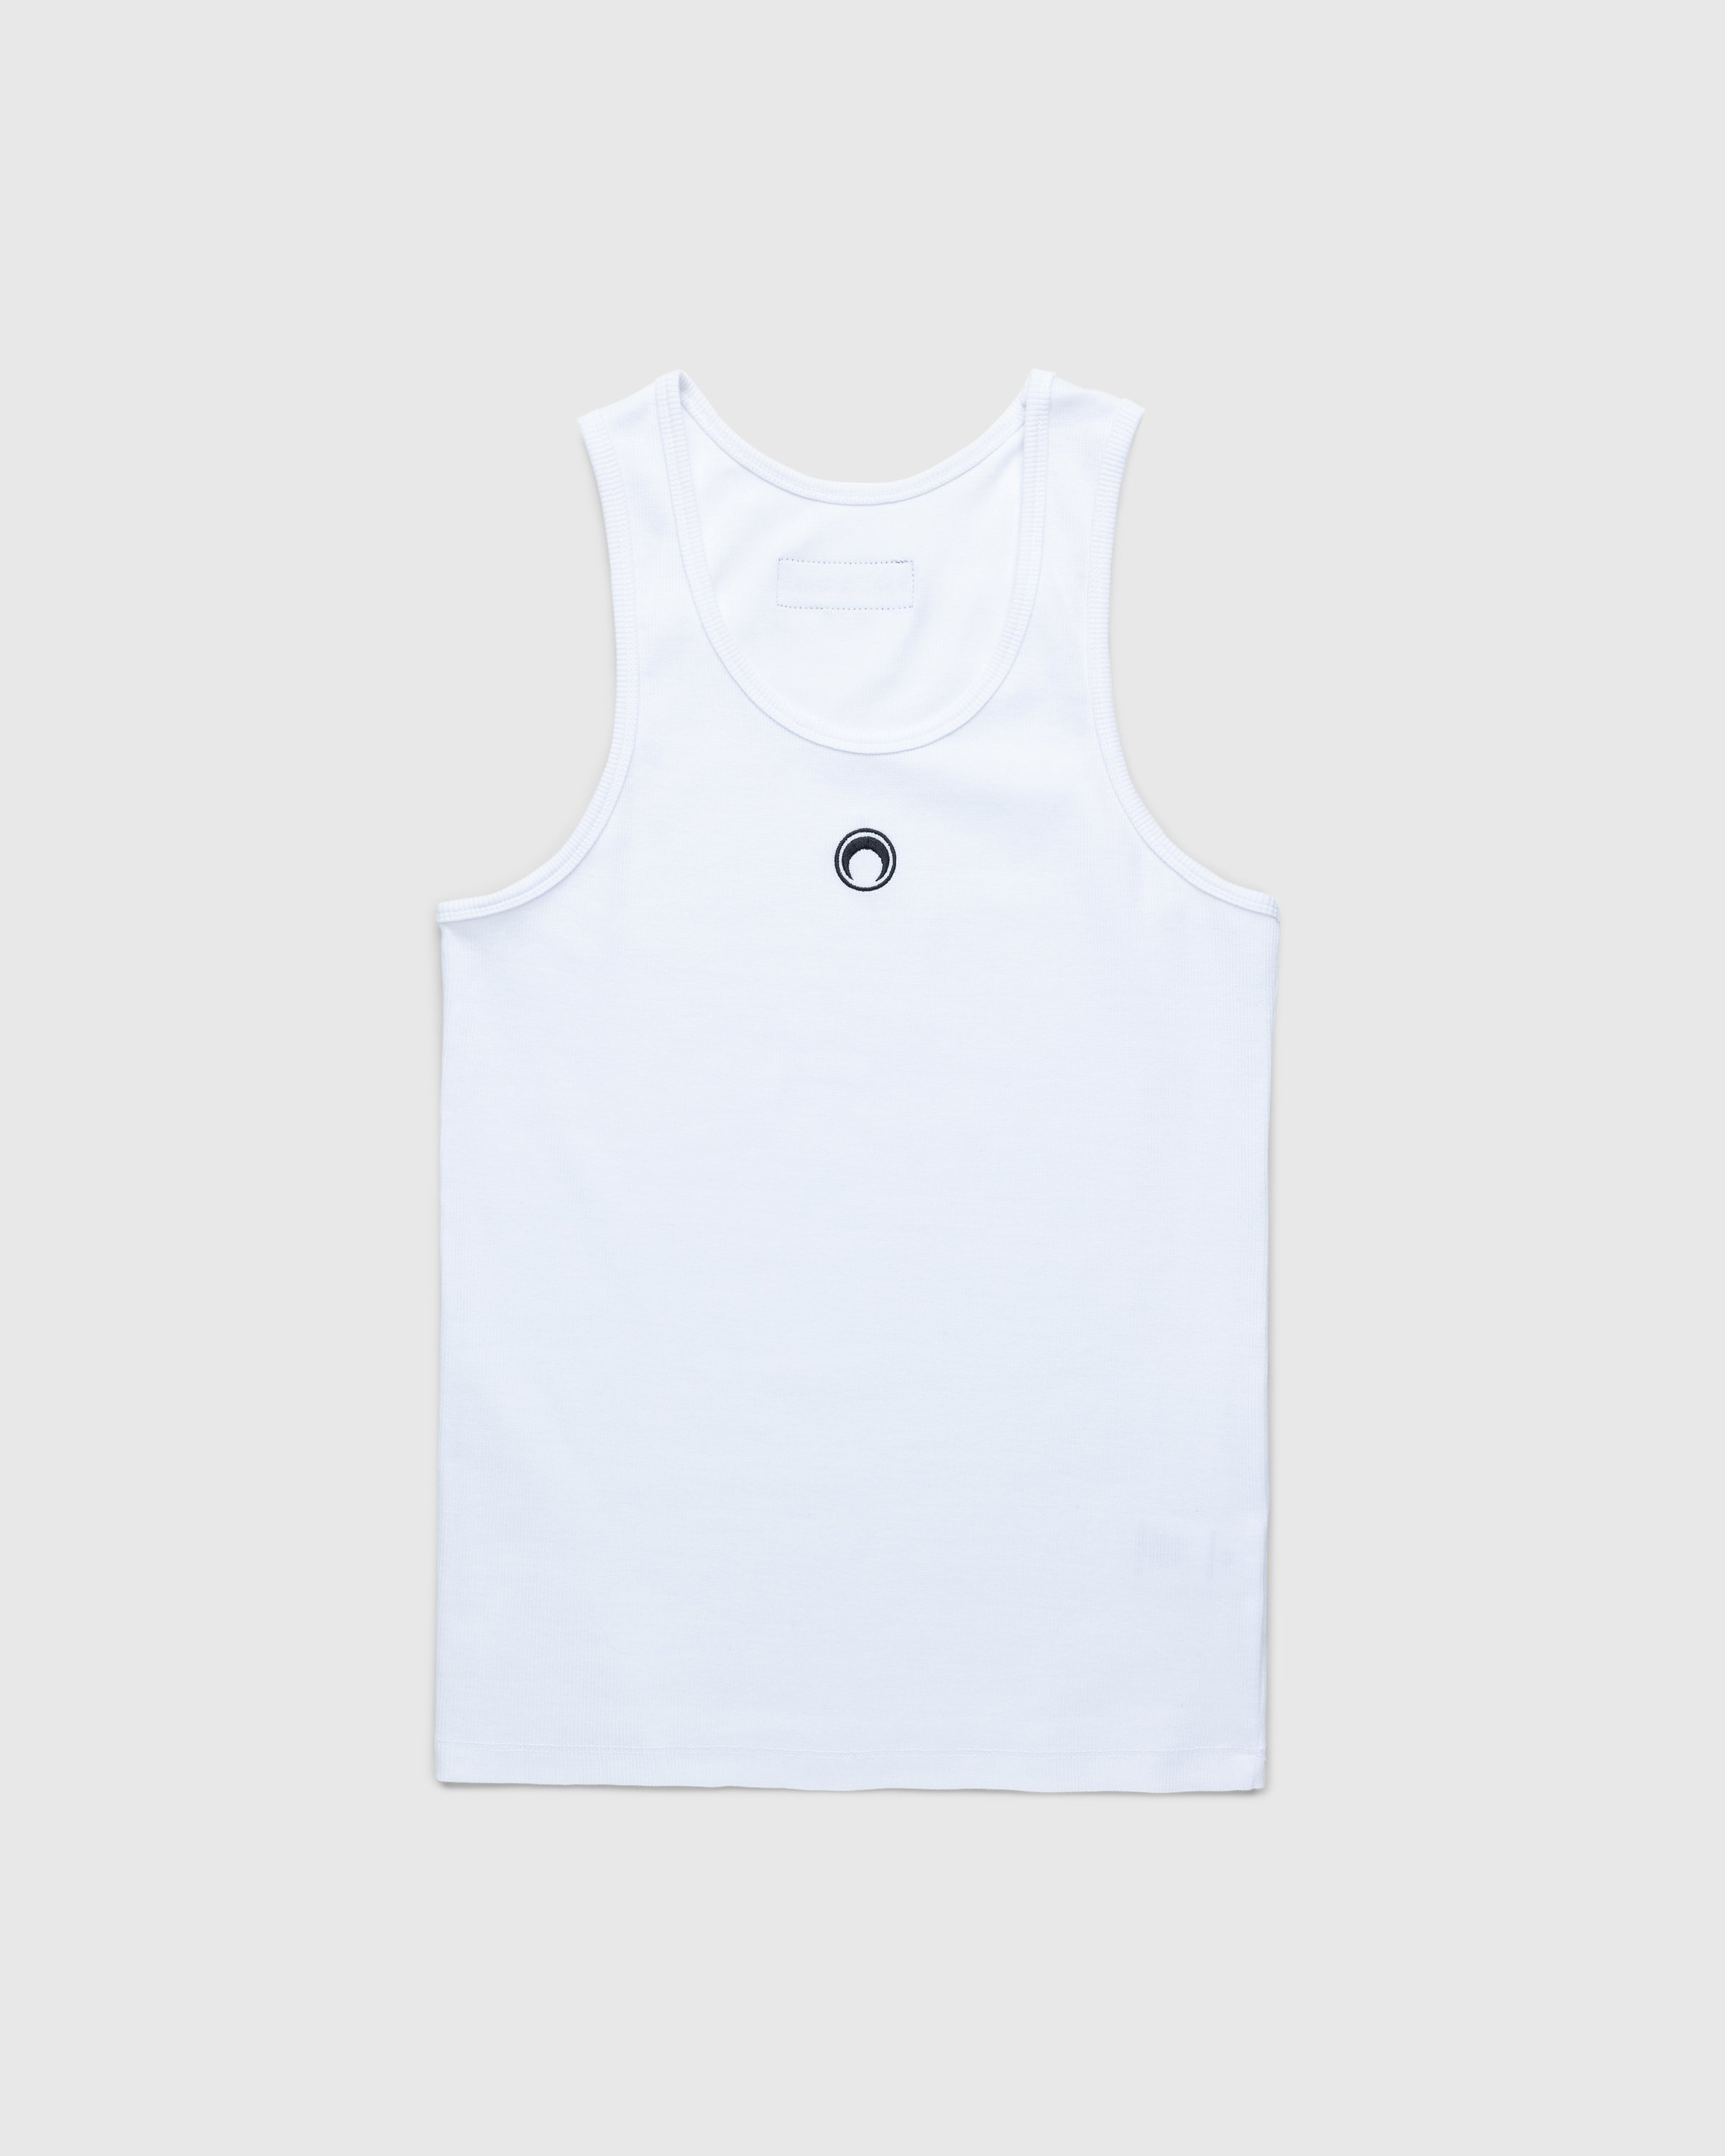 Marine Serre – Organic Cotton Fitted Tank Top White - Tops - White - Image 1